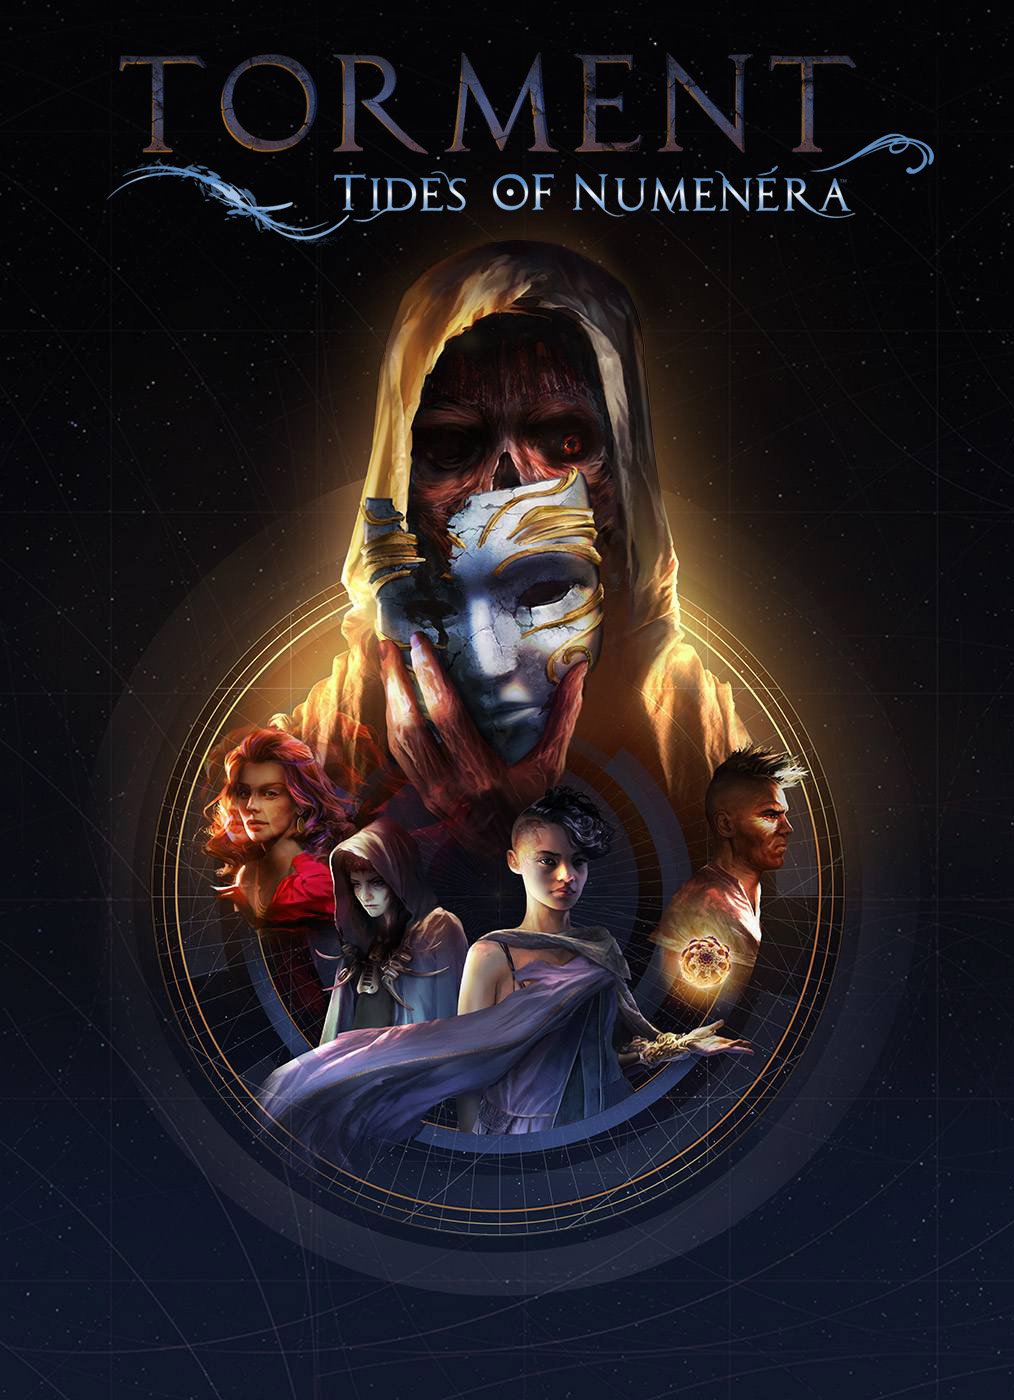 Image of Torment: Tides of Numenera